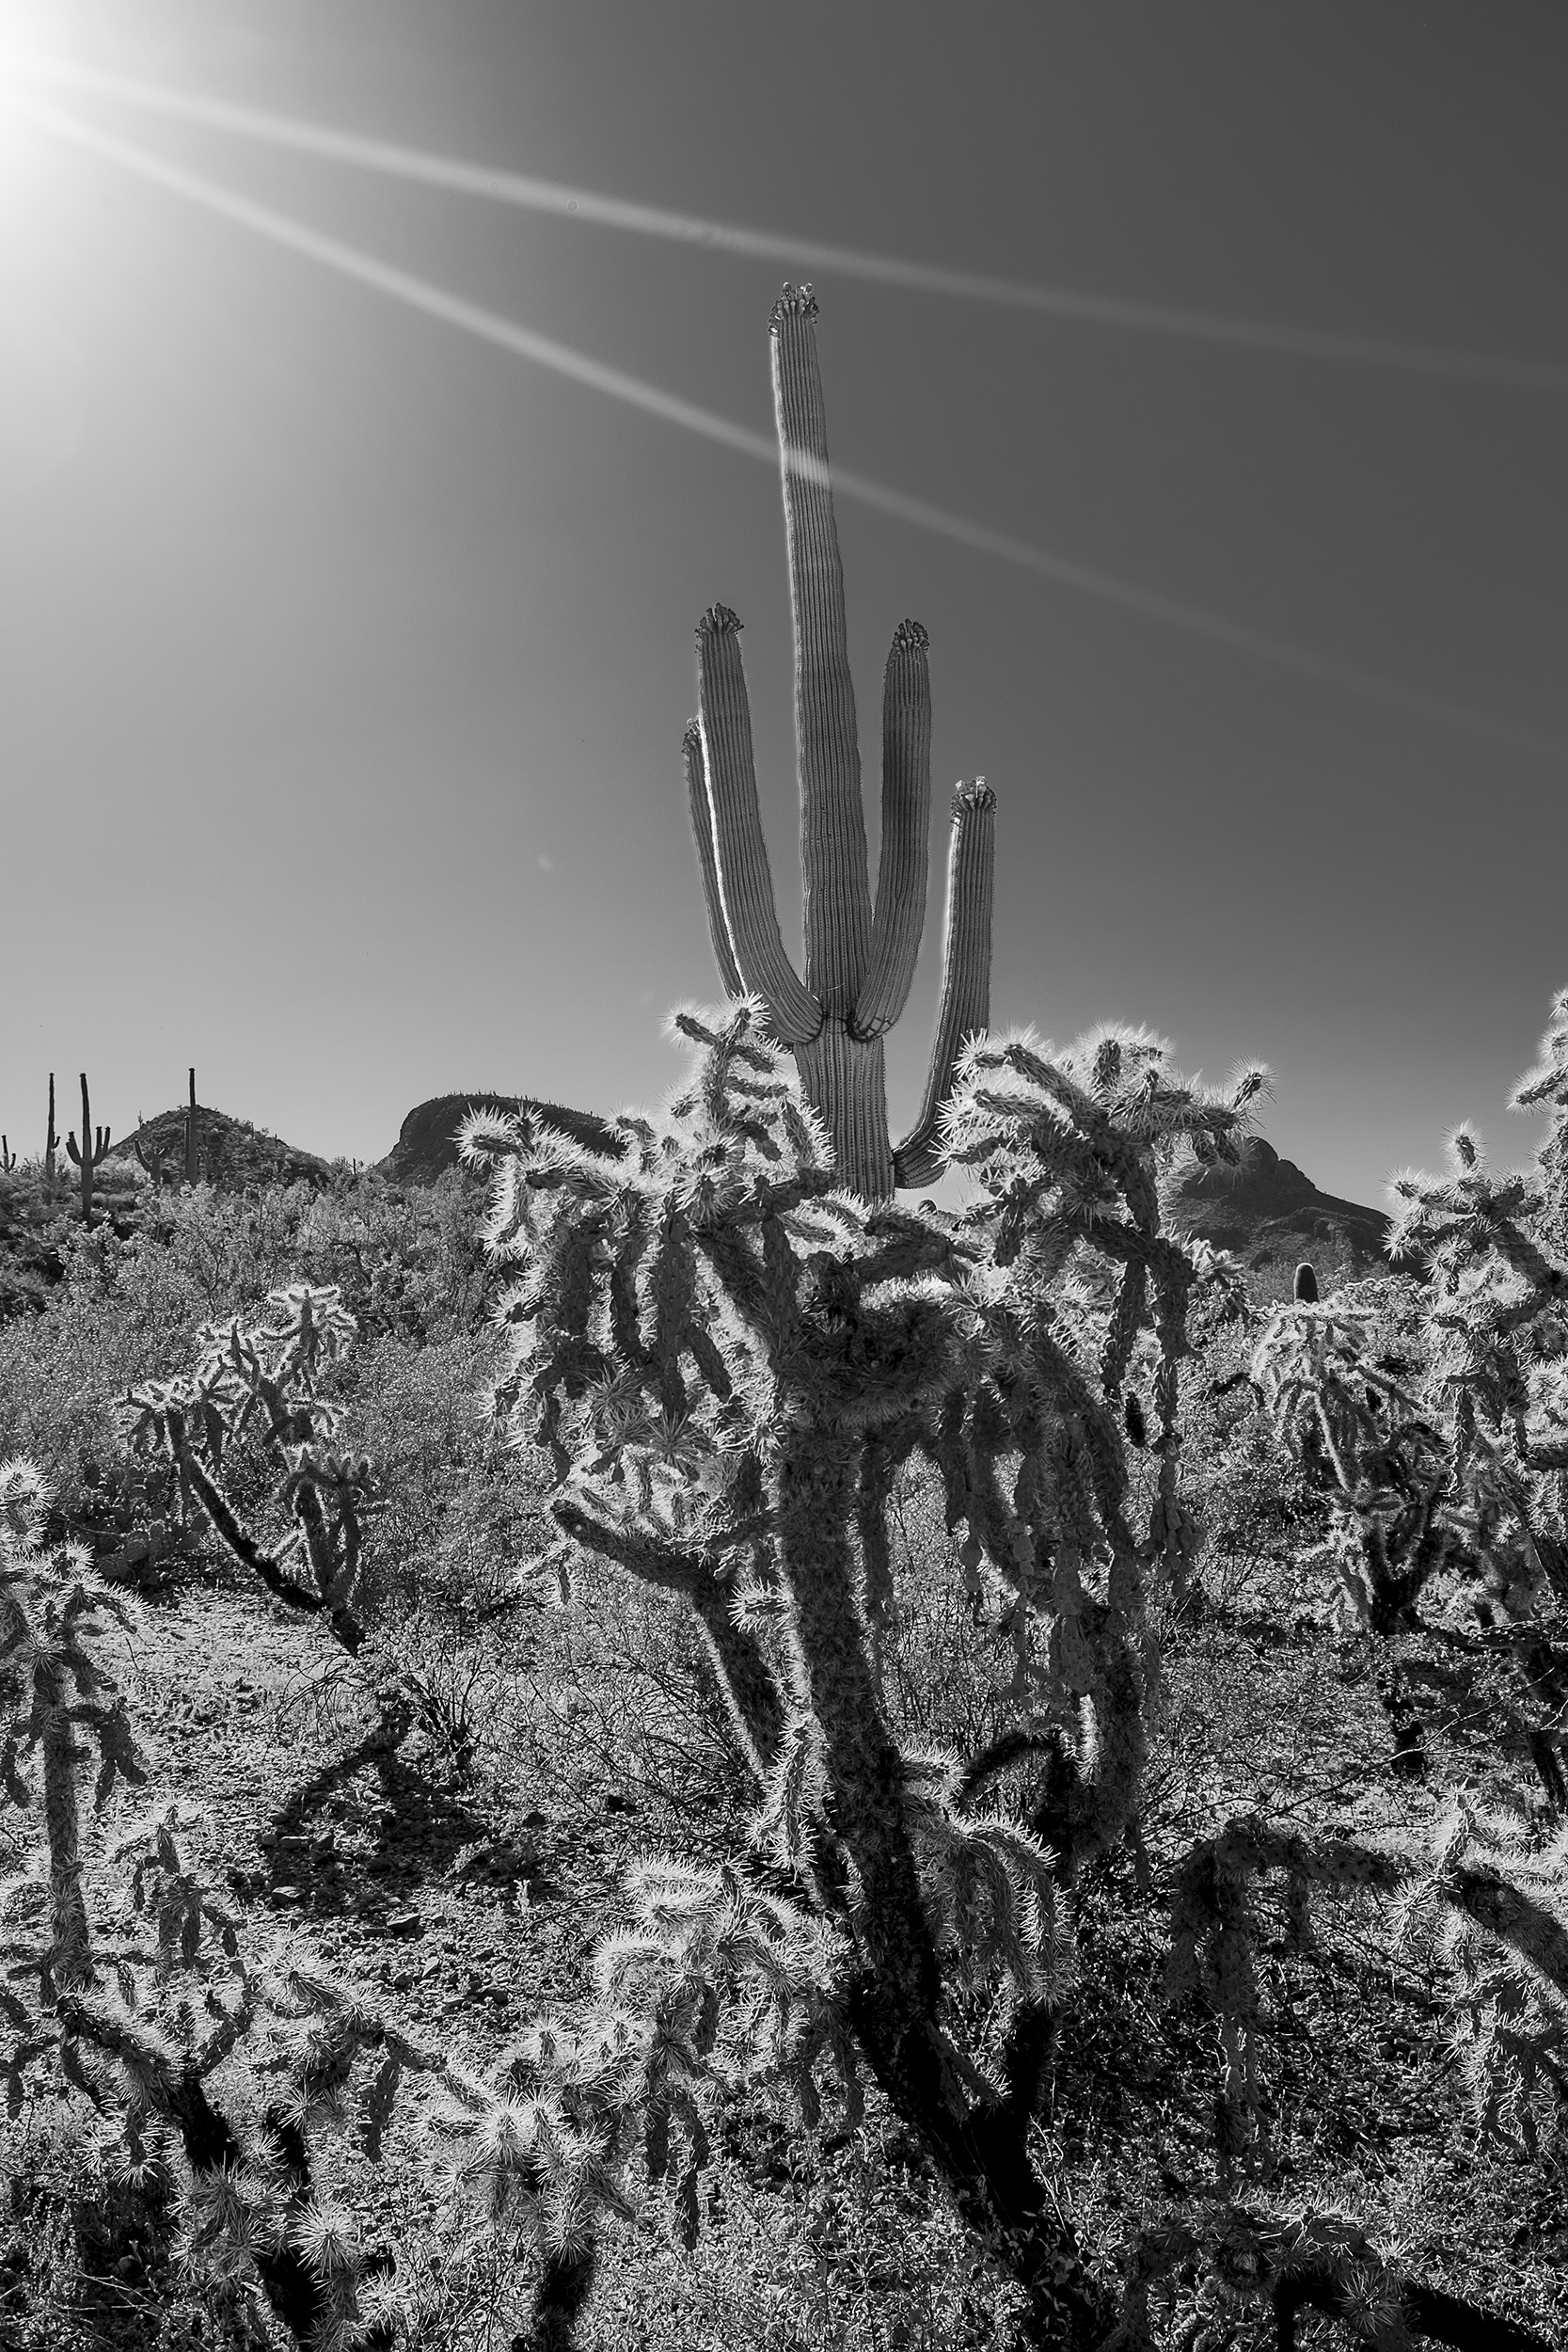 XE2_Tucson_May08_23_4205_2500px